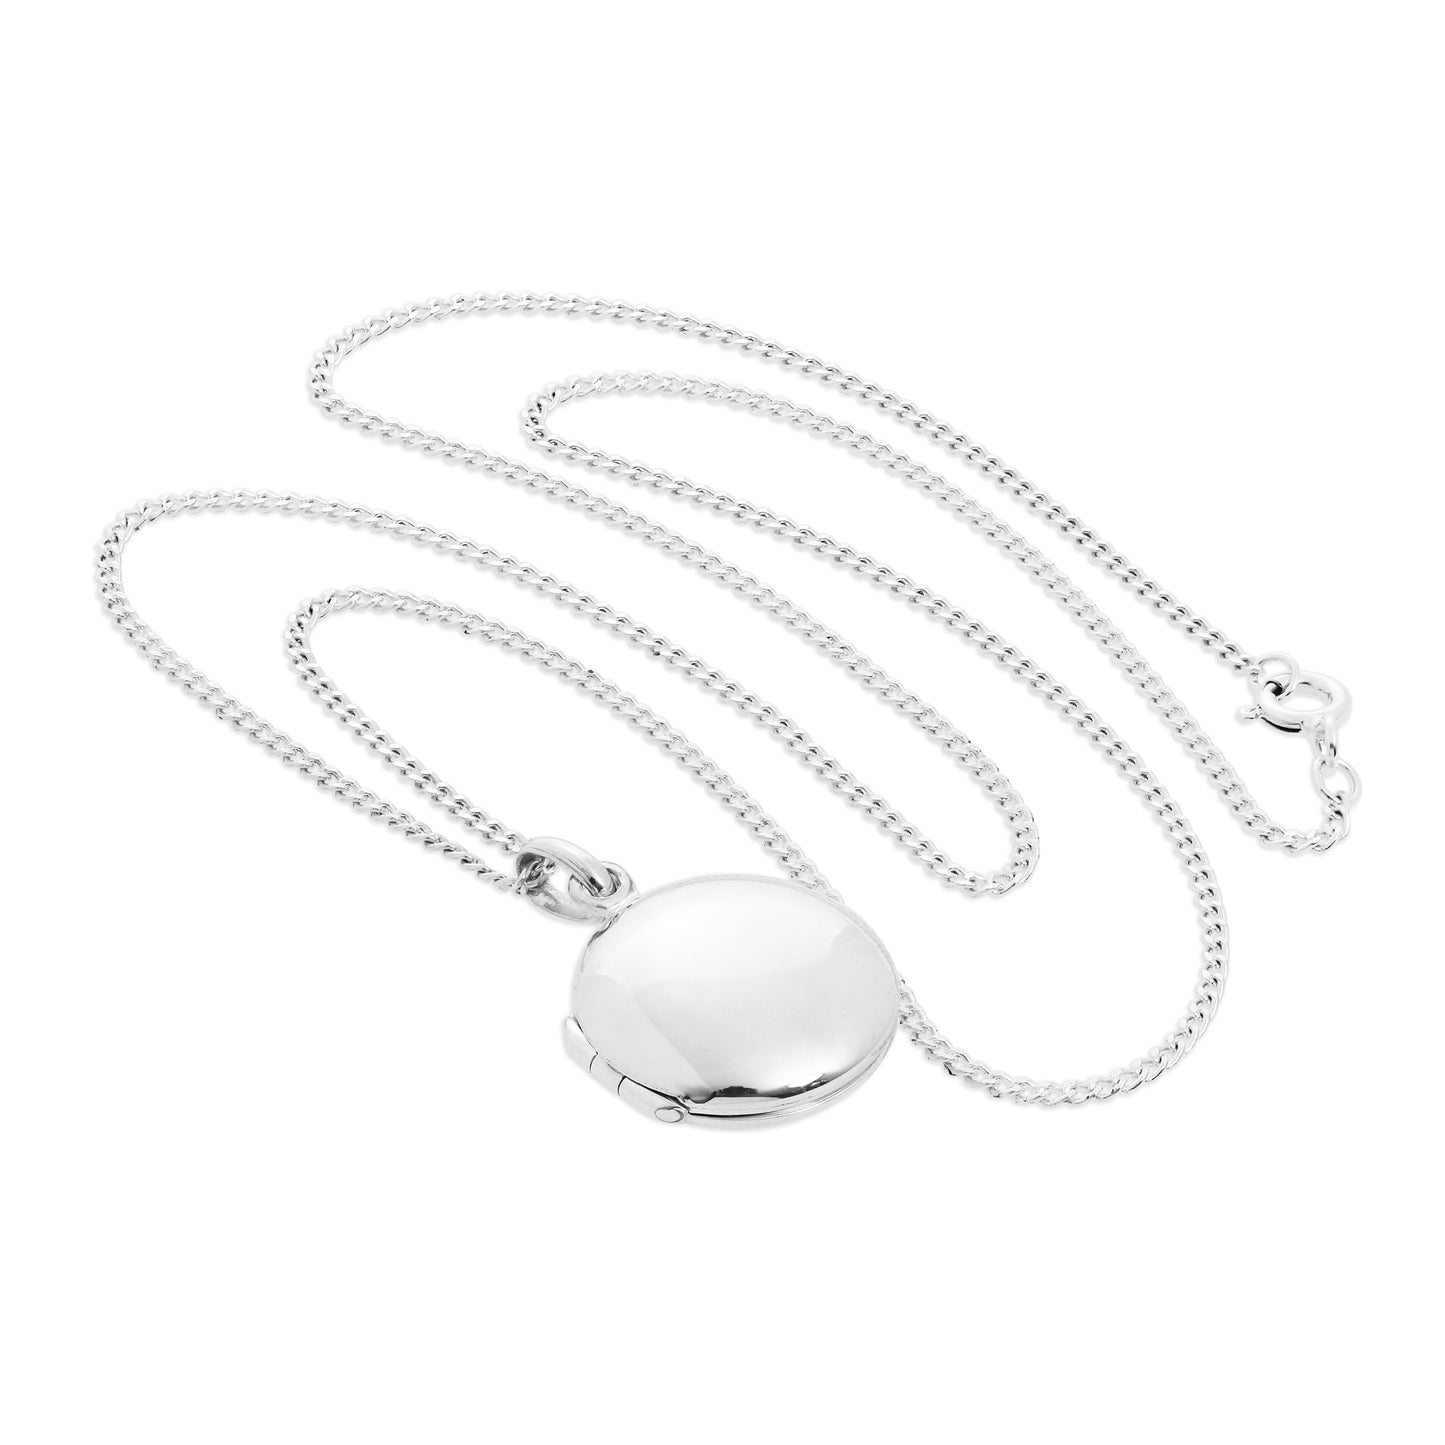 Sterling Silver Plain Round Locket on Chain 14 - 32 Inches